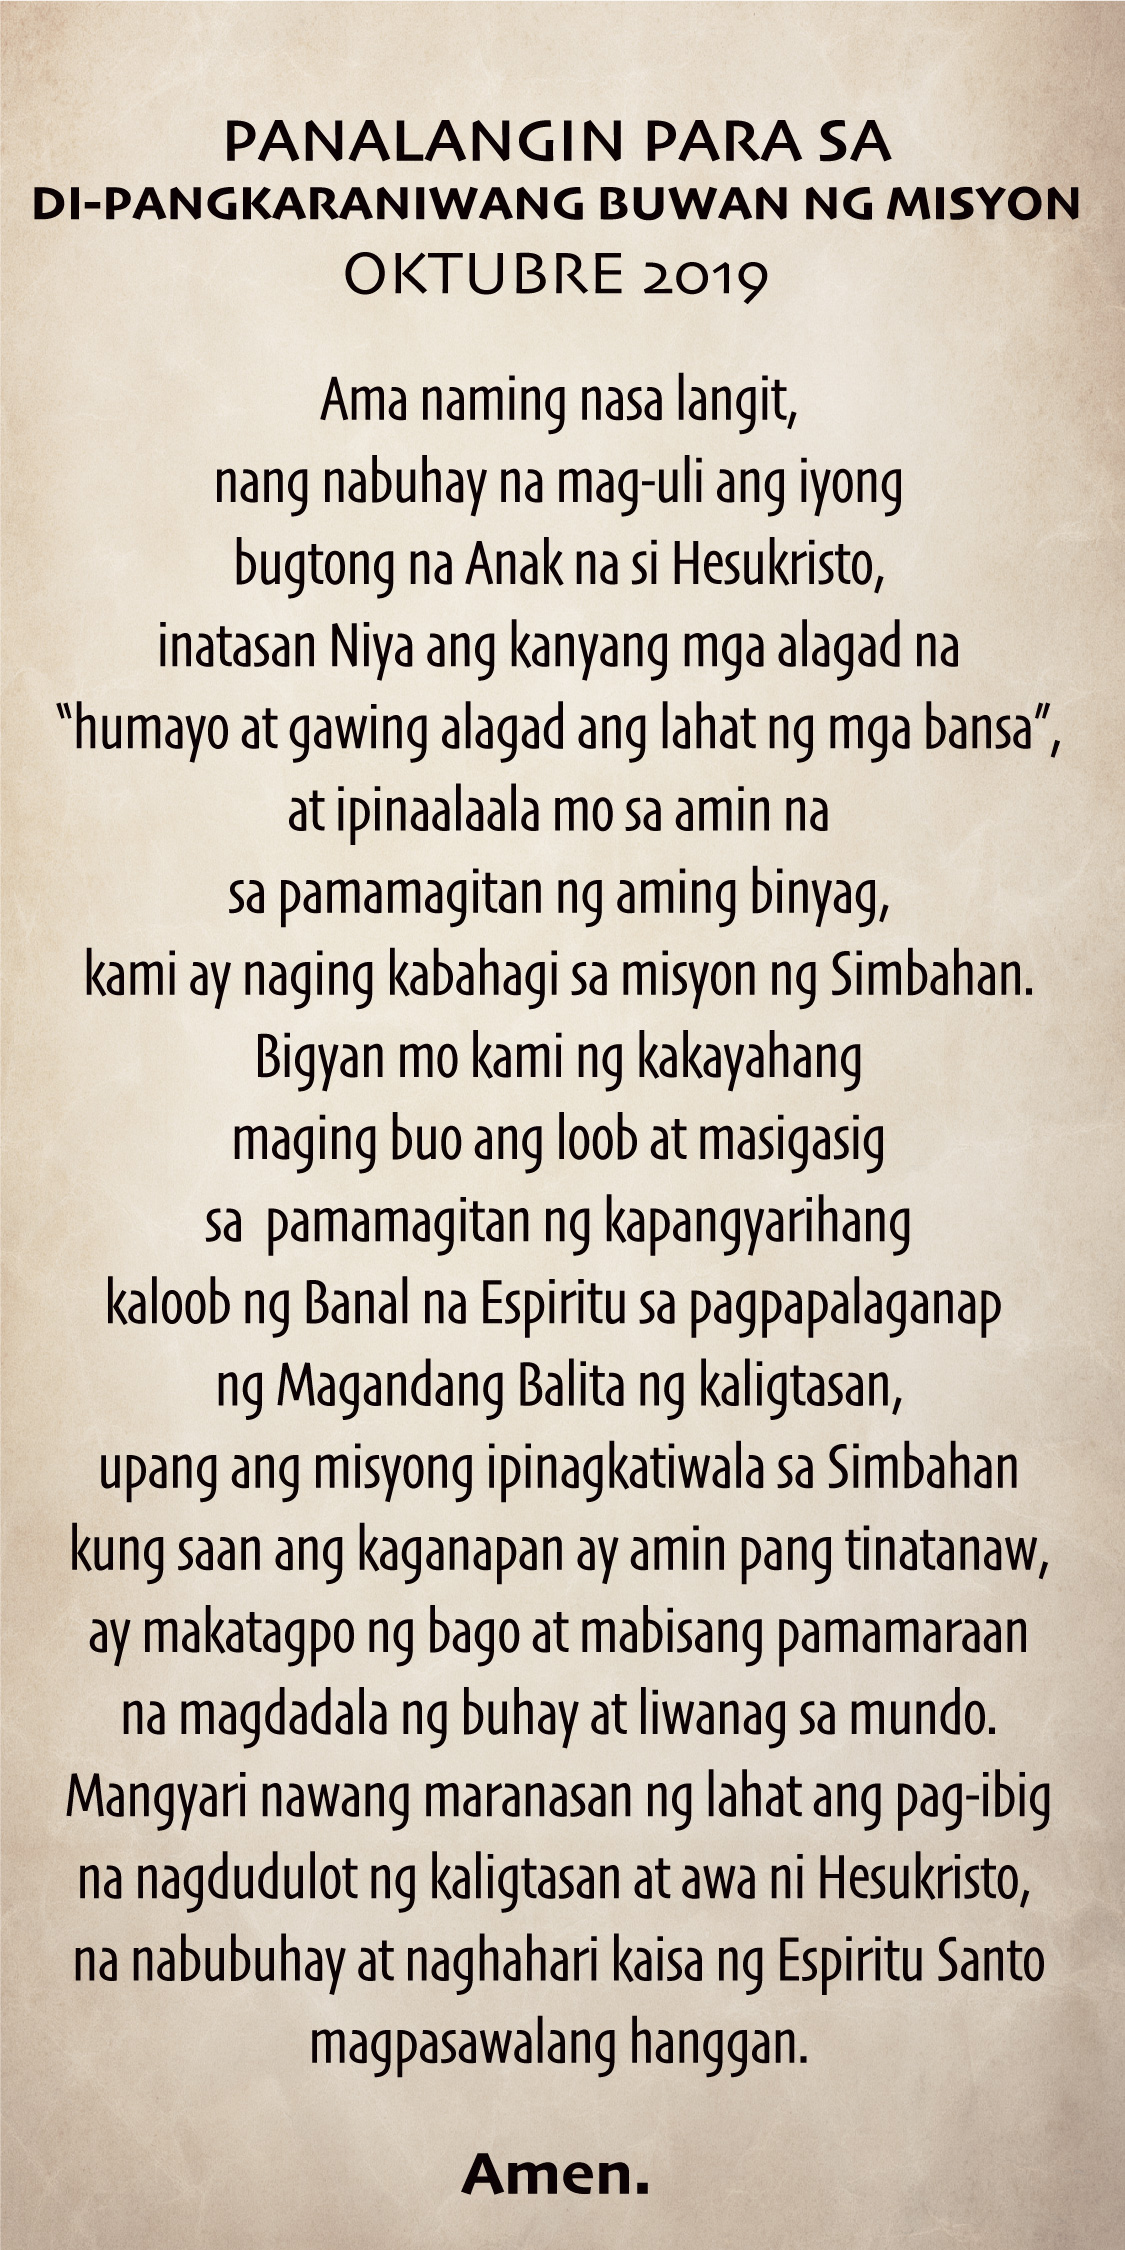 Prayer for the extraordinary mission month October 2019 (English & Tagalog)